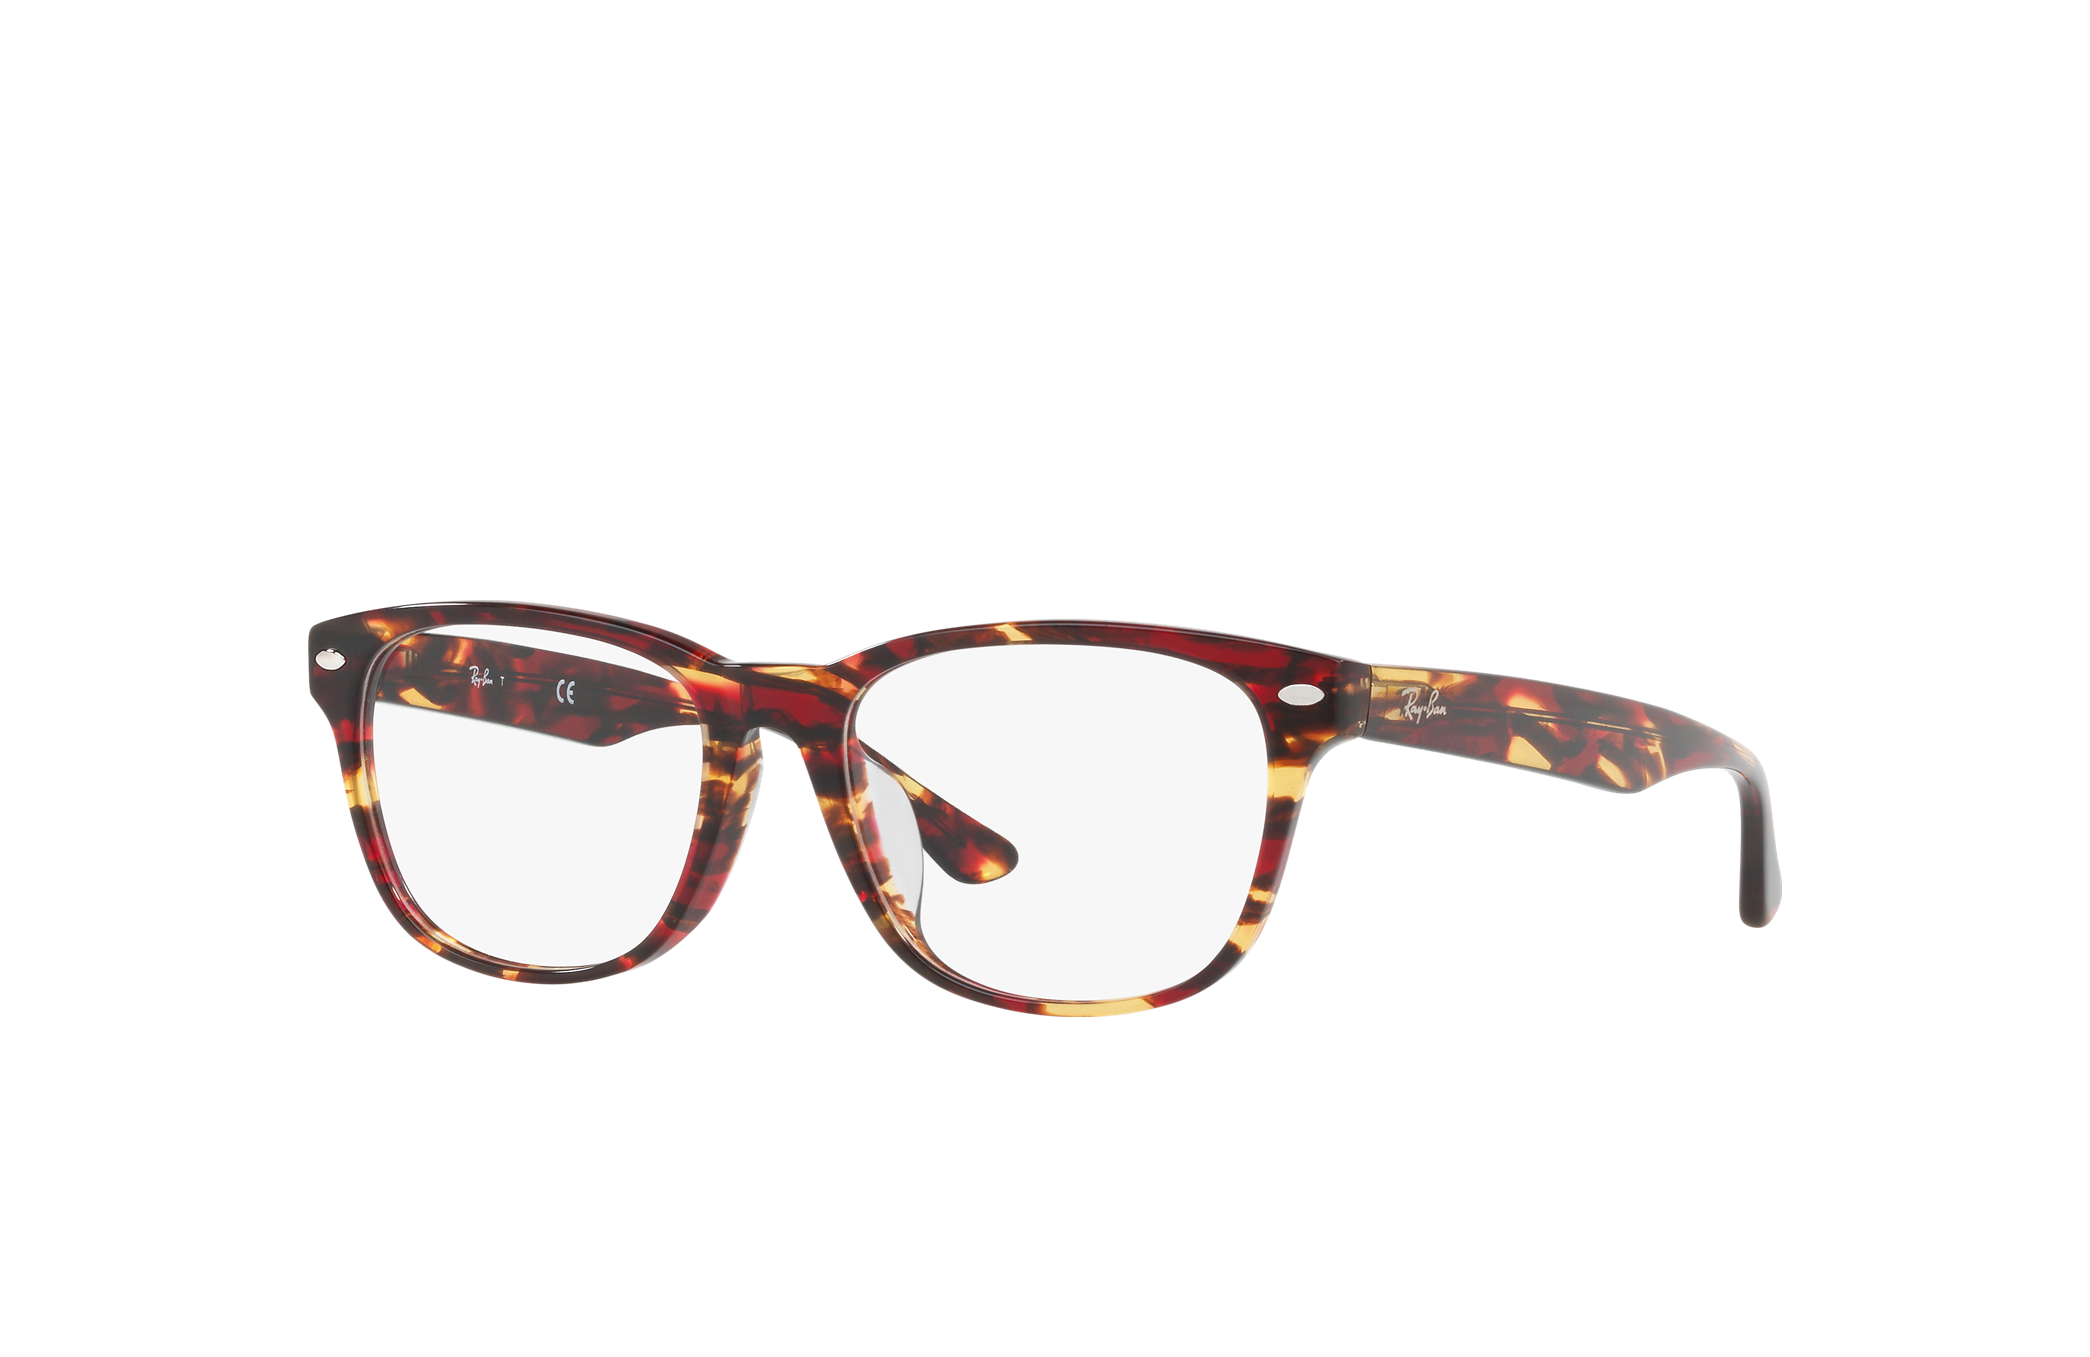 Rb5359f Eyeglasses with Tortoise Frame - RB5359F | Ray-Ban®